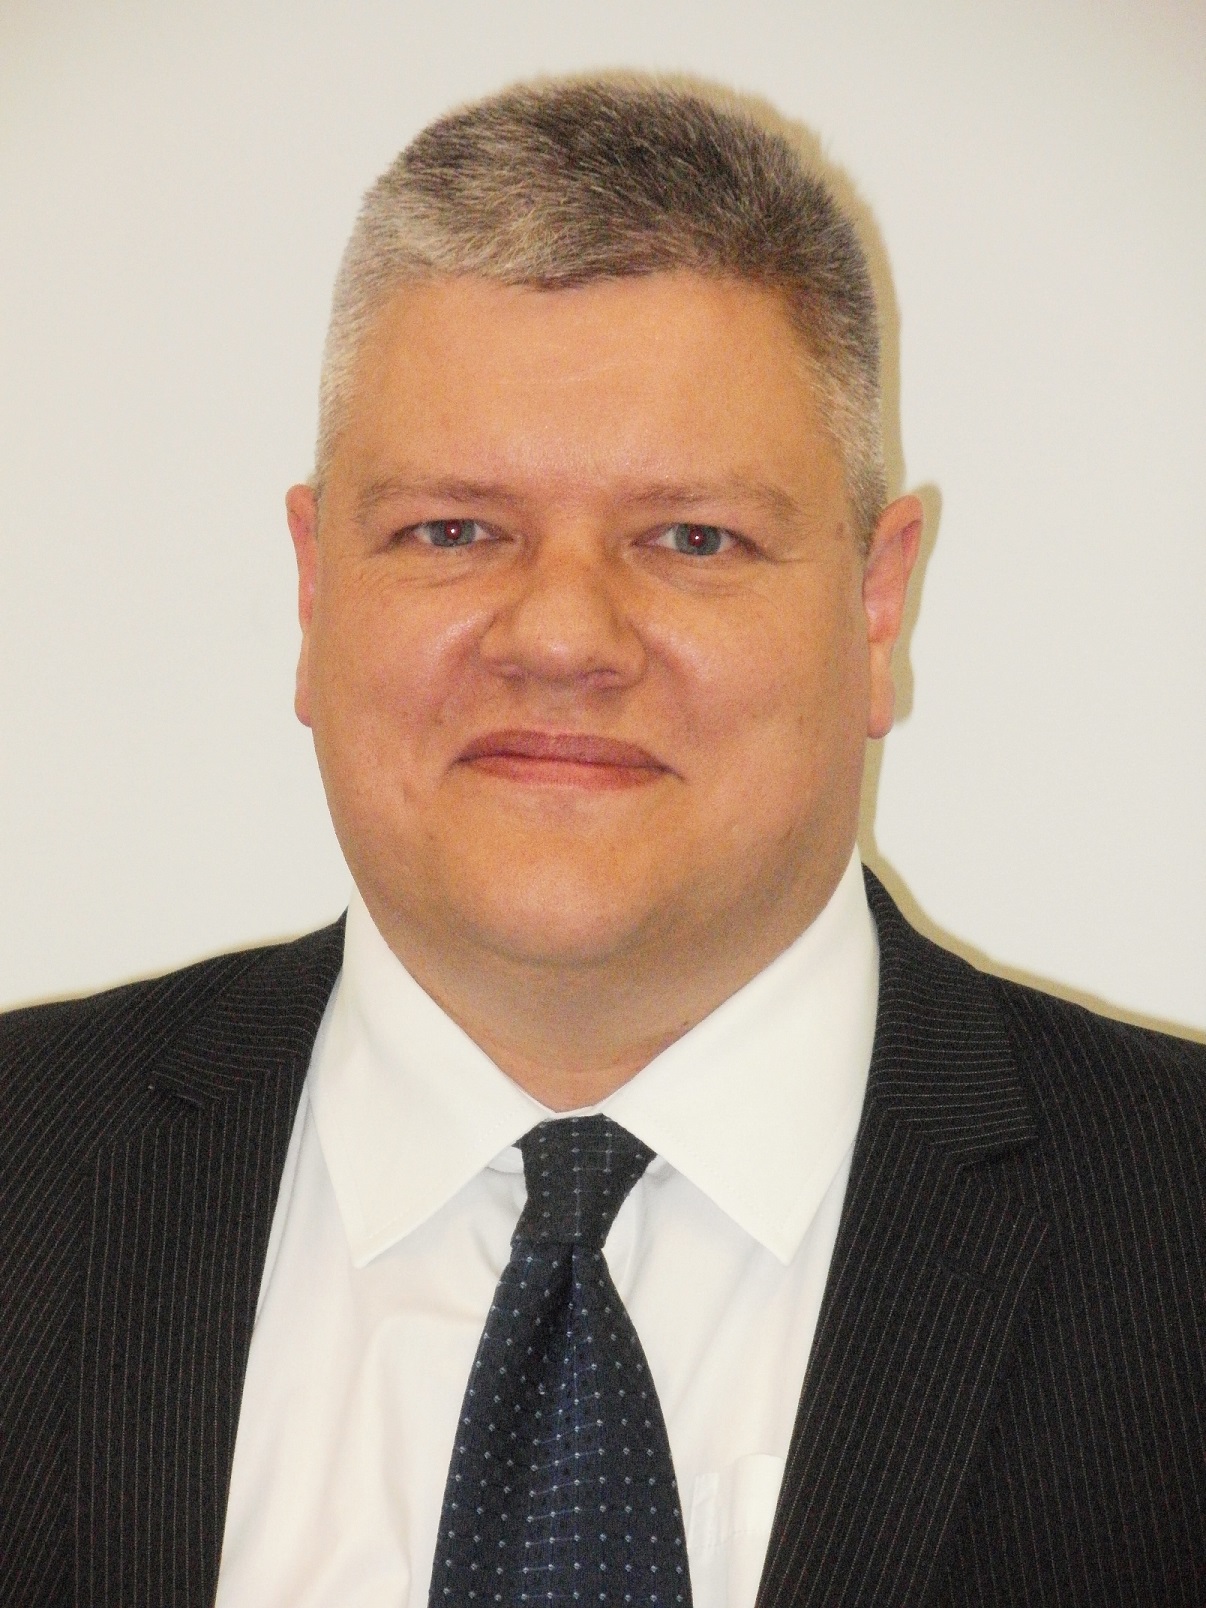 Personal Injury Expert Joins FDC Law